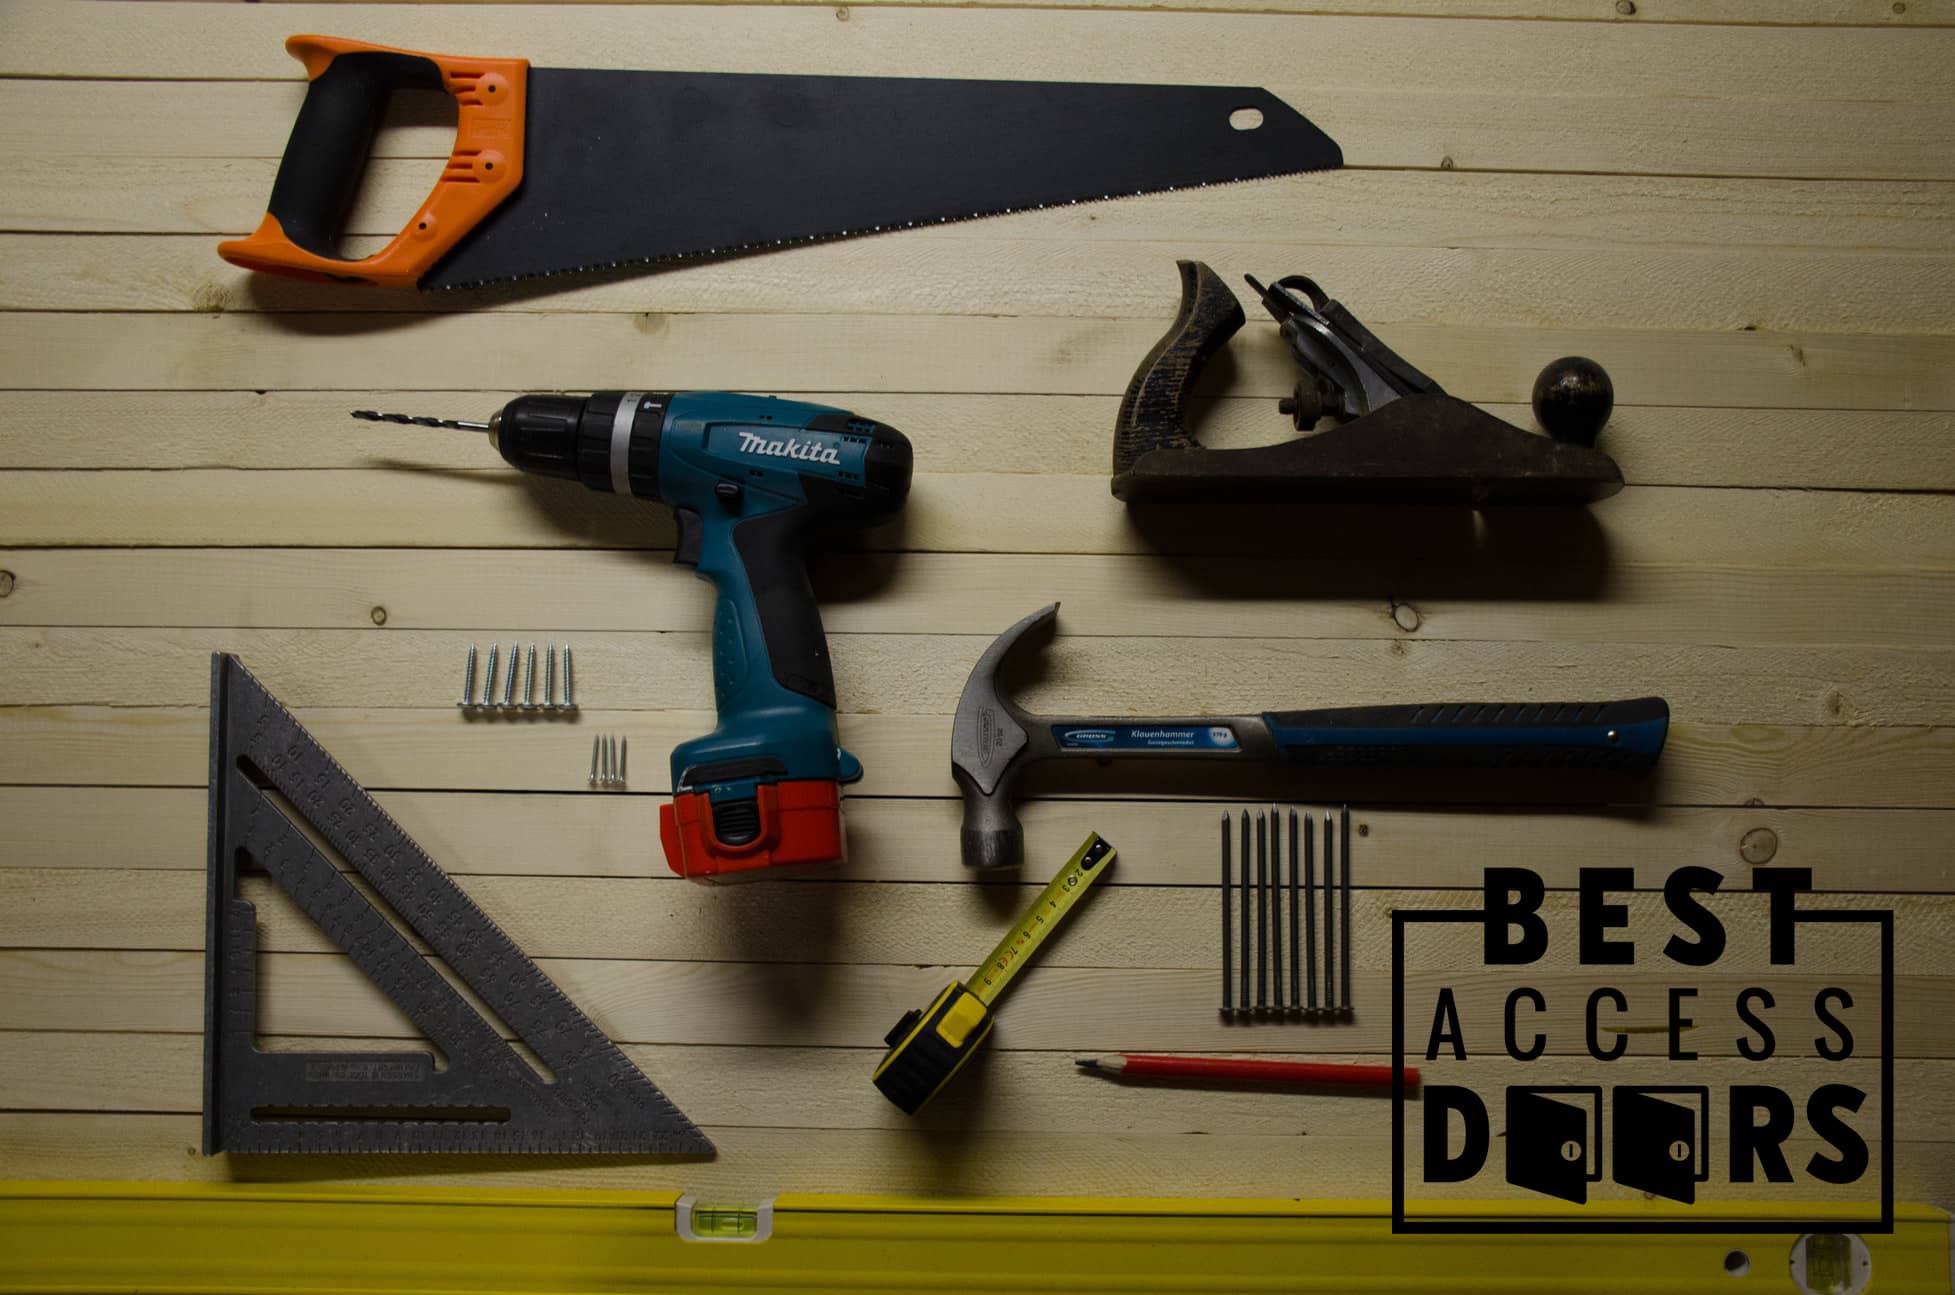 Top 5 Tools for the Home